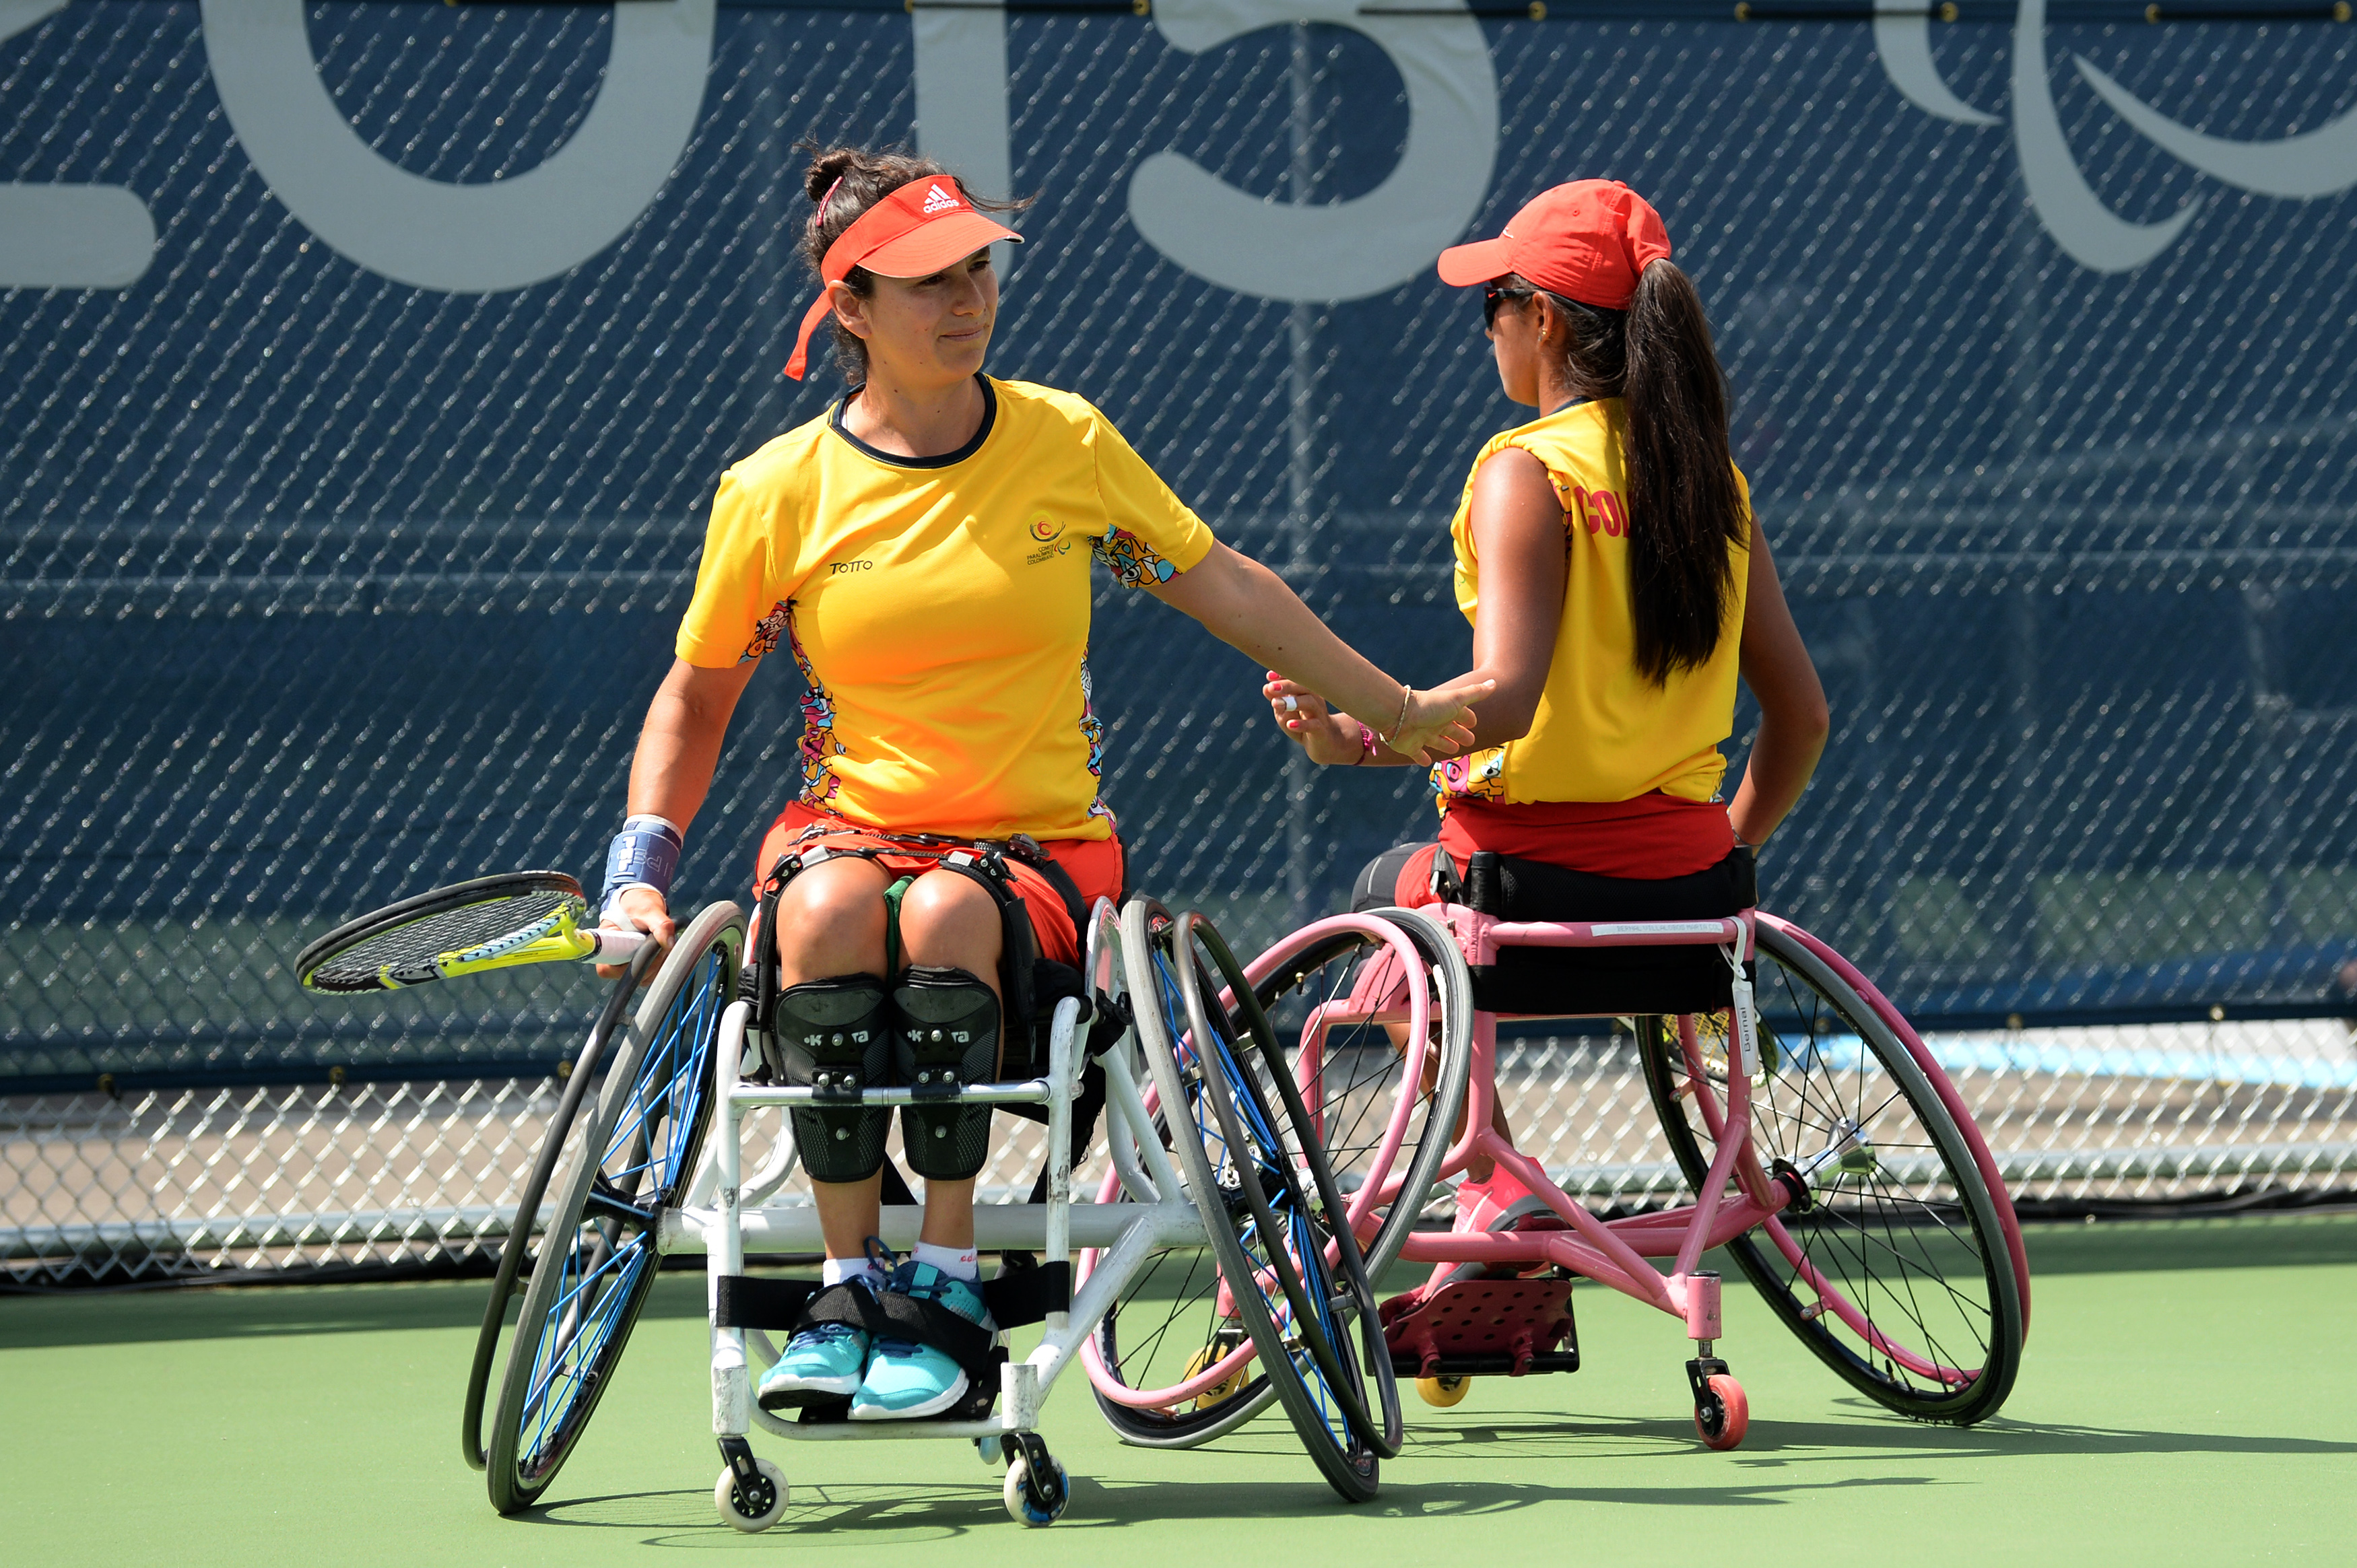 Angelica Bernal and Johana Martinez (Colombia) during the Women's Doubles Semi-Final against USA in Toronto at the 2015 Parapan American Games.